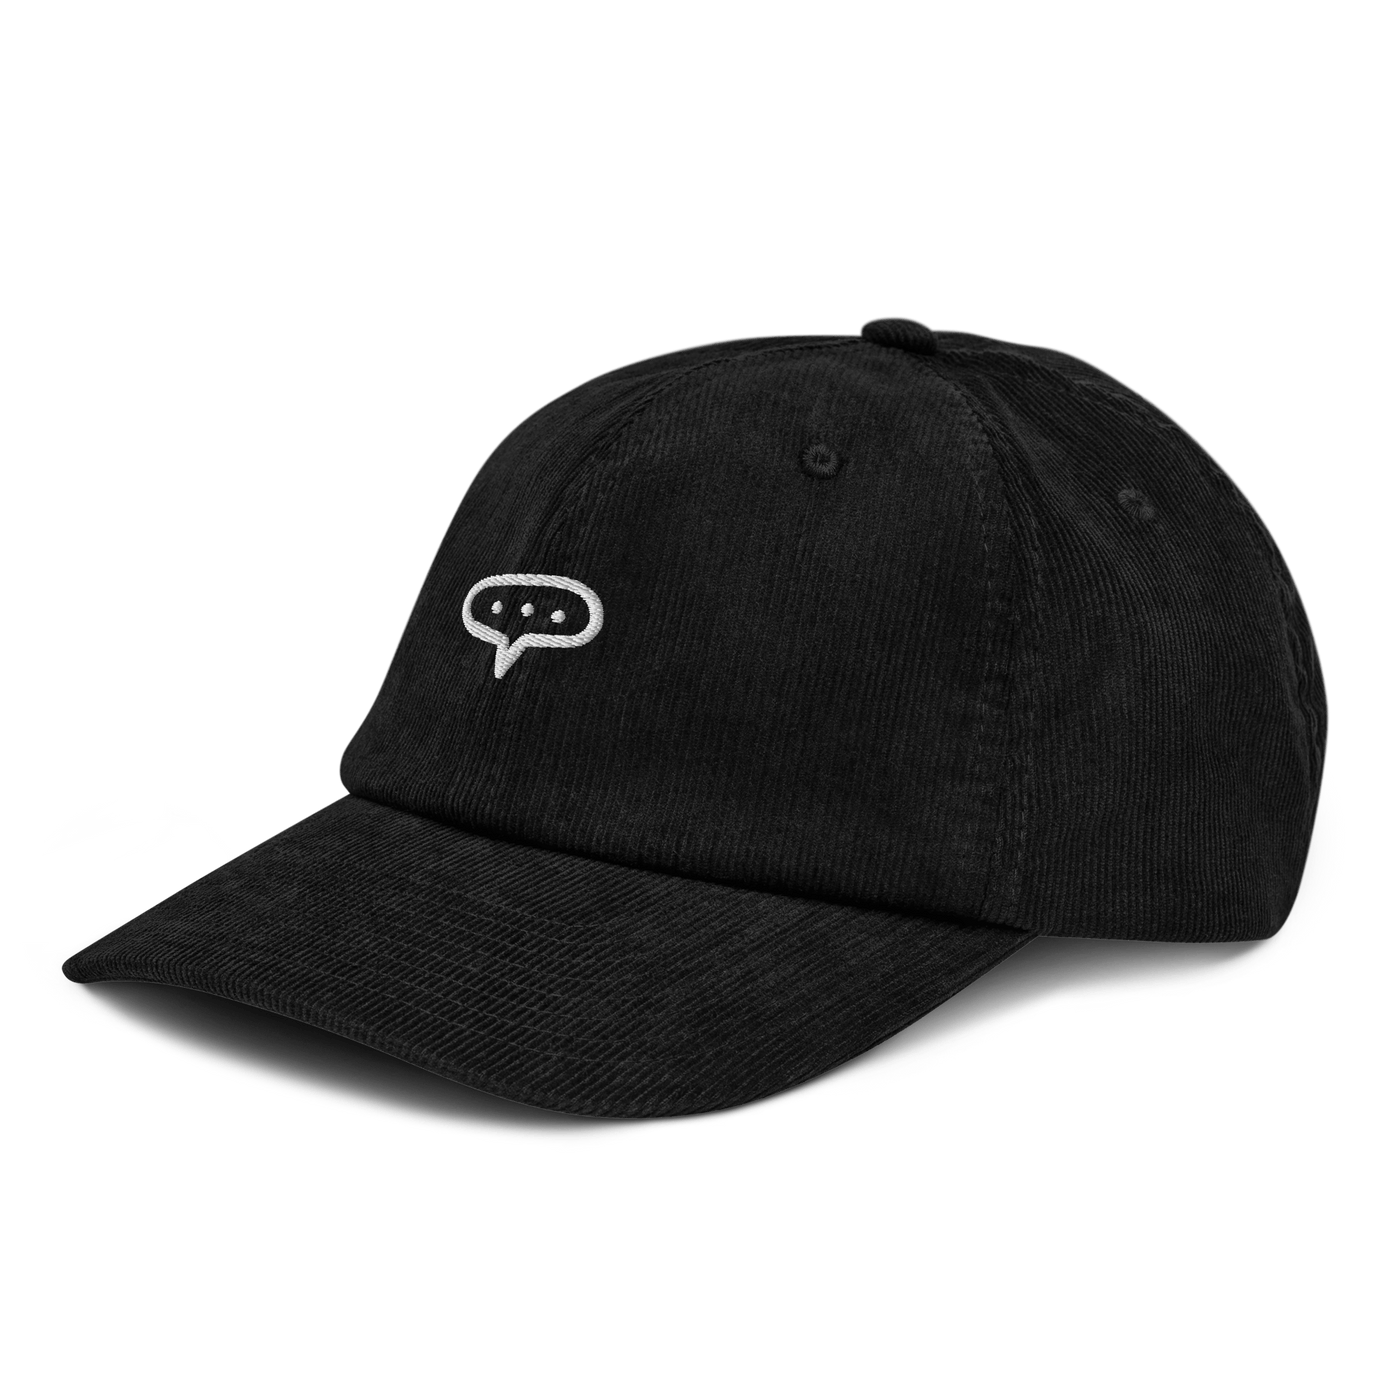 Thinking Corduroy hat - Black - - Just Another Cap Store